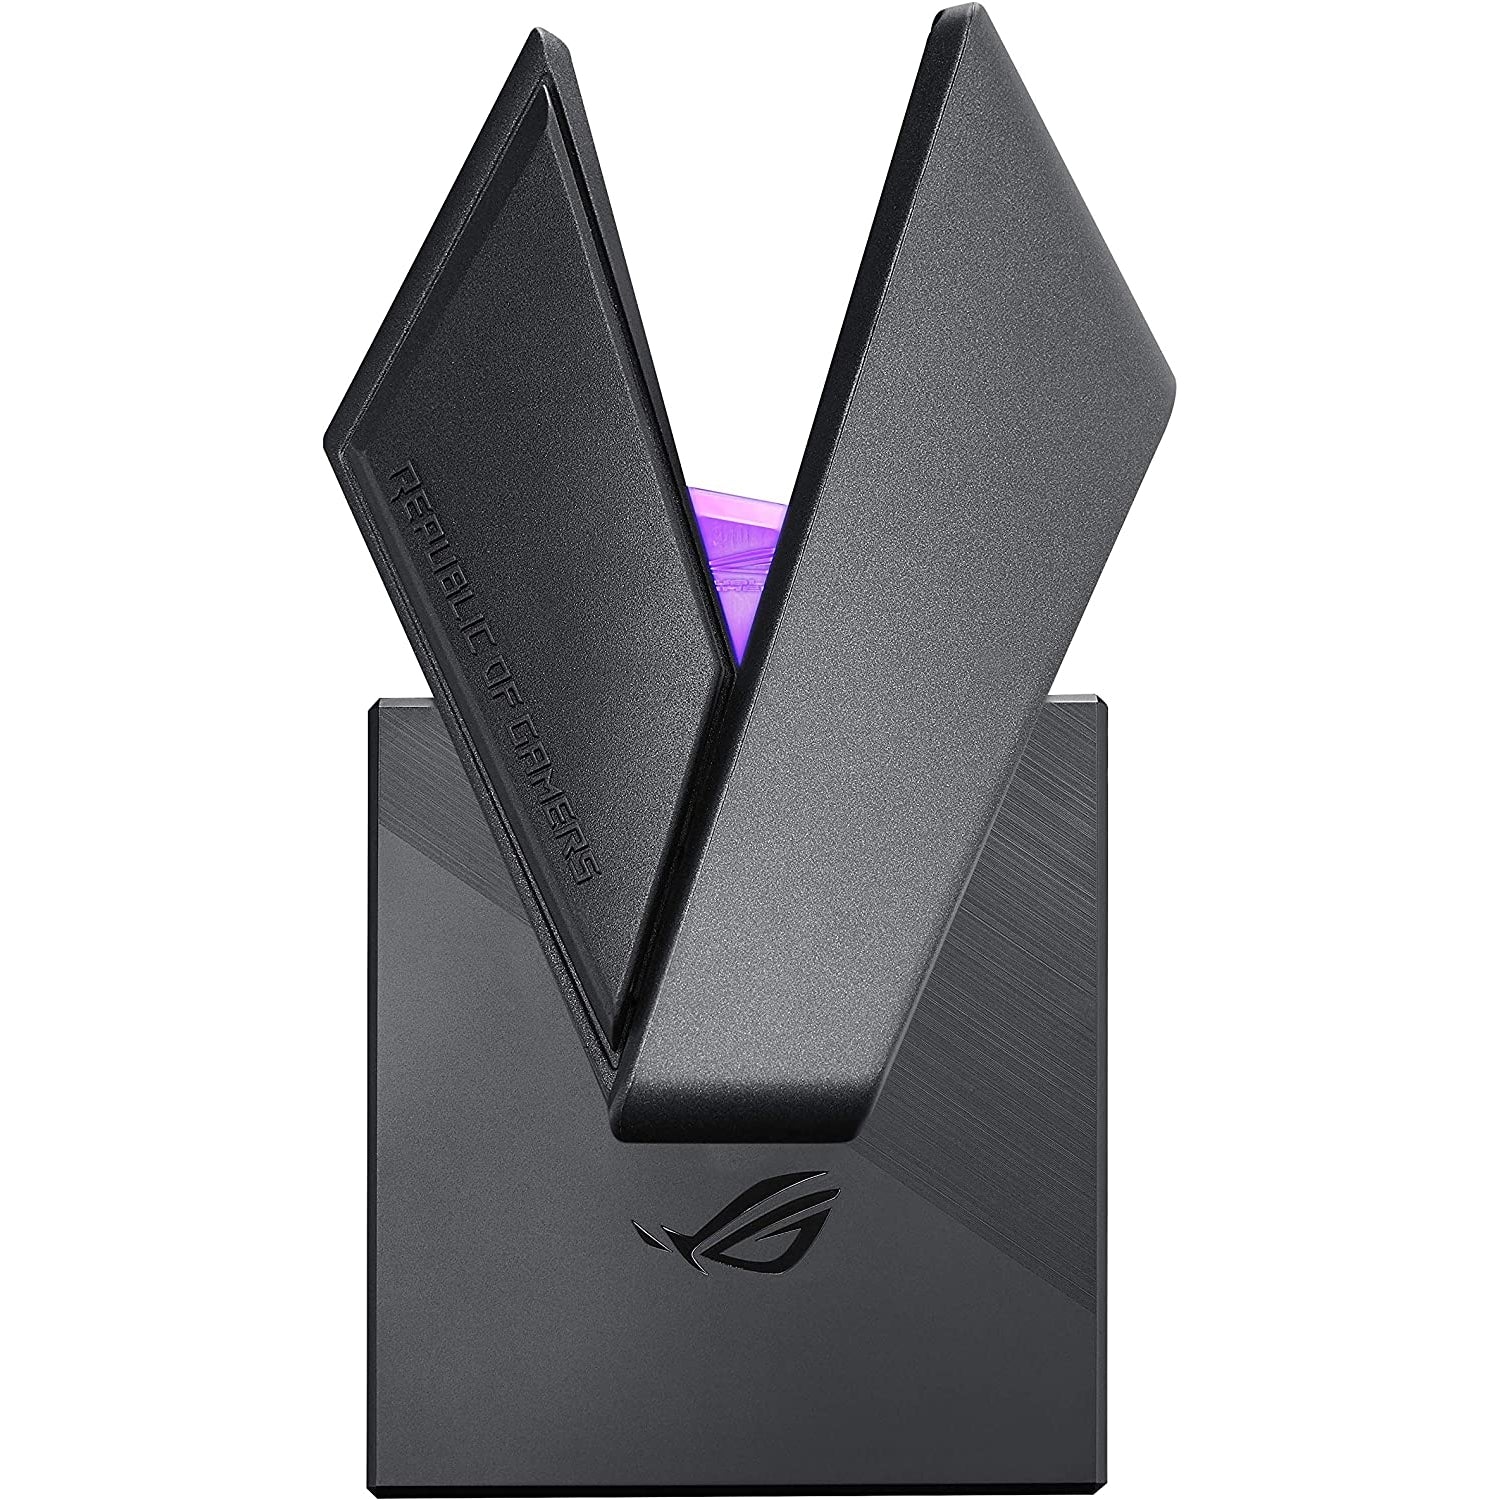 ASUS ROG Throne Qi with Wireless Charging, Dual USB 3.1 Ports and Aura Sync, Black